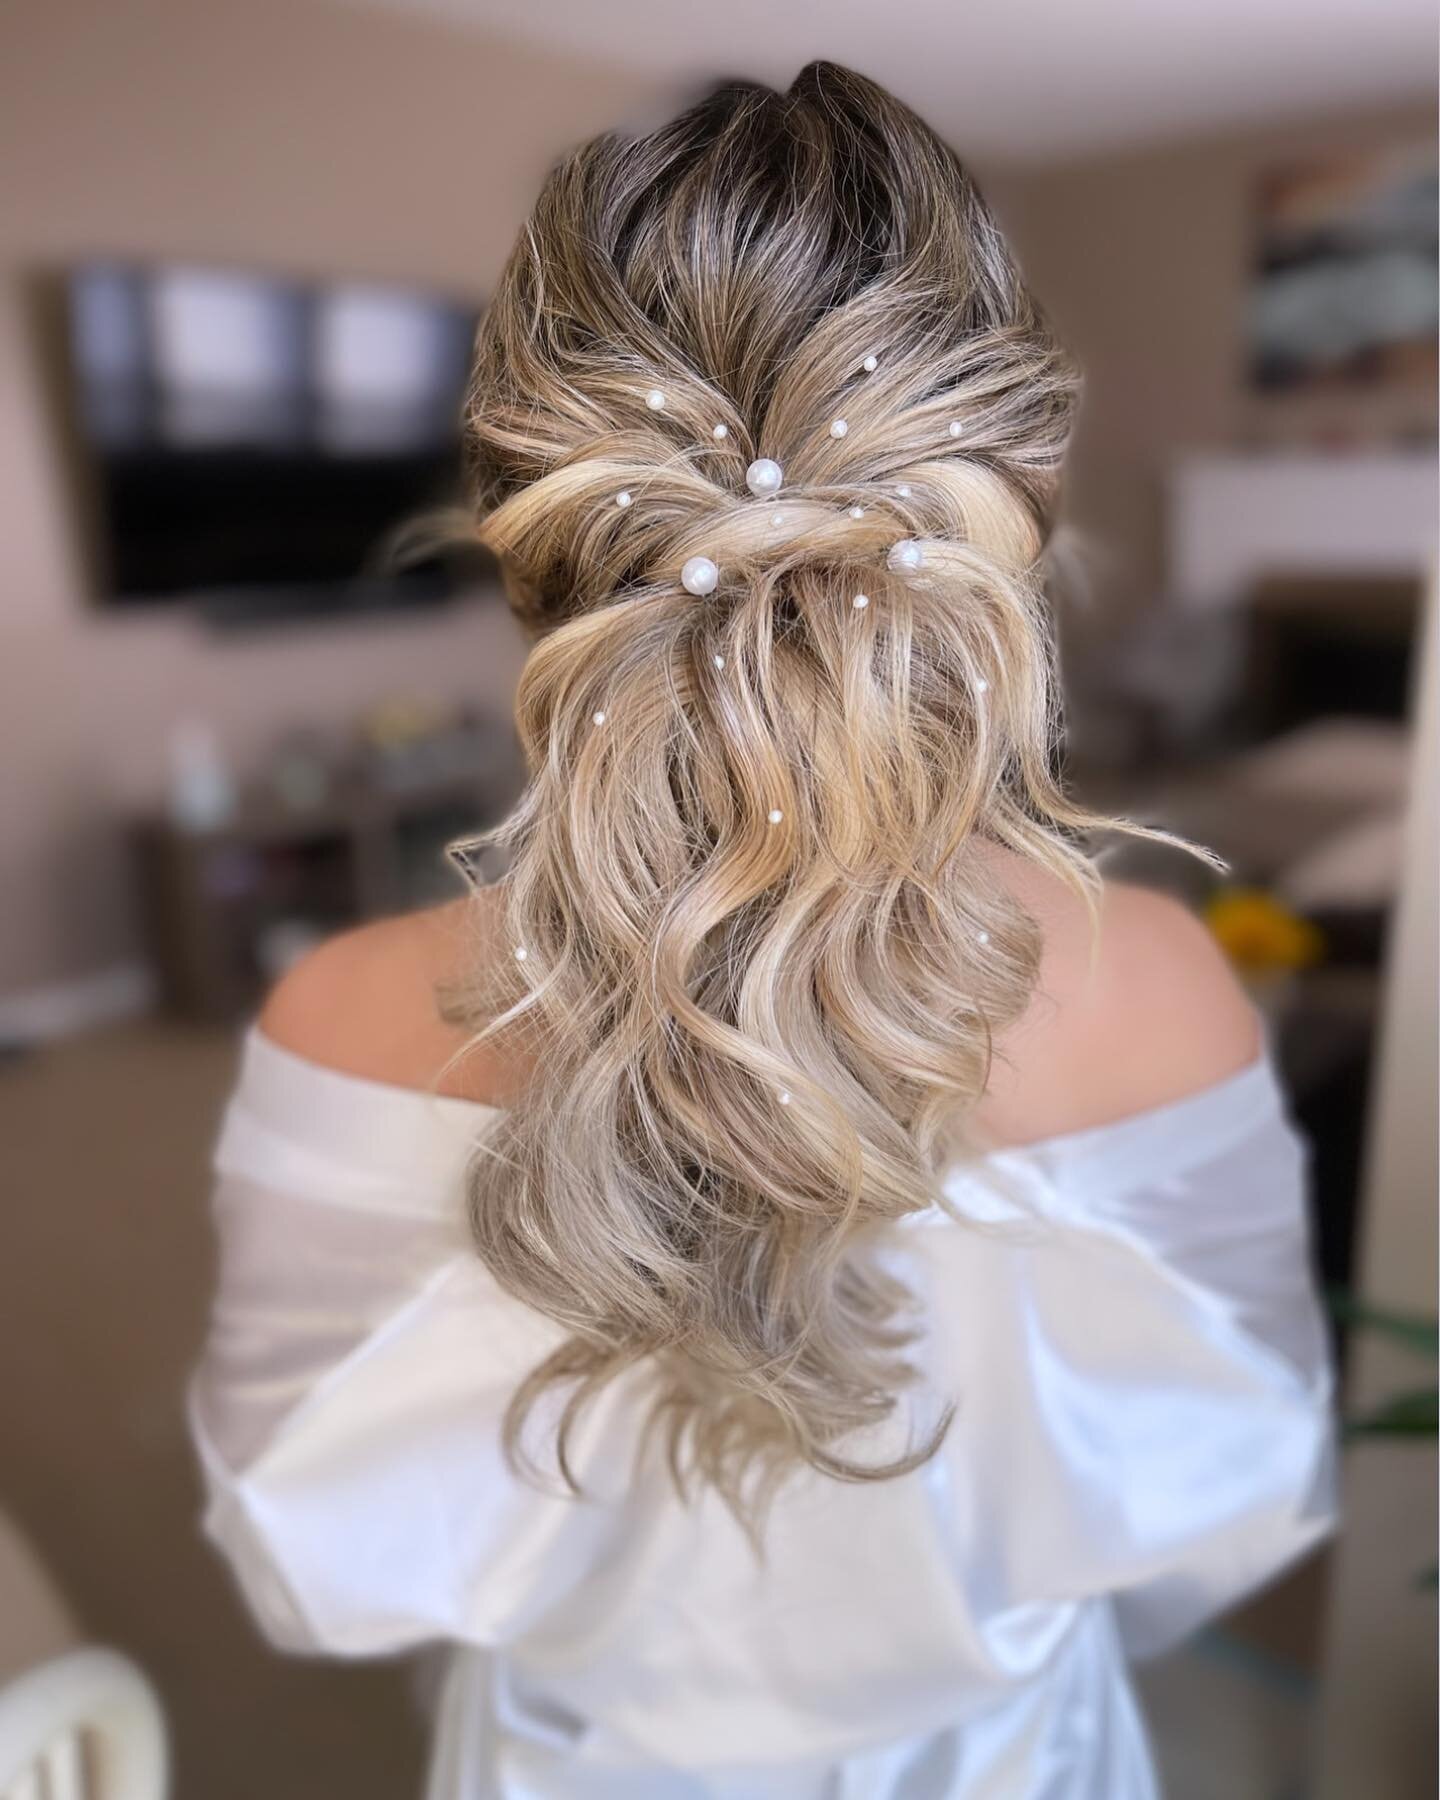 THIS was so FUN!! A messy, but pretty party pony!! Thank you for slaying this one @livraefit 💓

Makeup: @makeupbydiana_d 

&bull;

#partypony #bohopony #bridal #bridalhair #bride #bridehairstyle #longislandhairstylist #bridesoflongisland #longisland